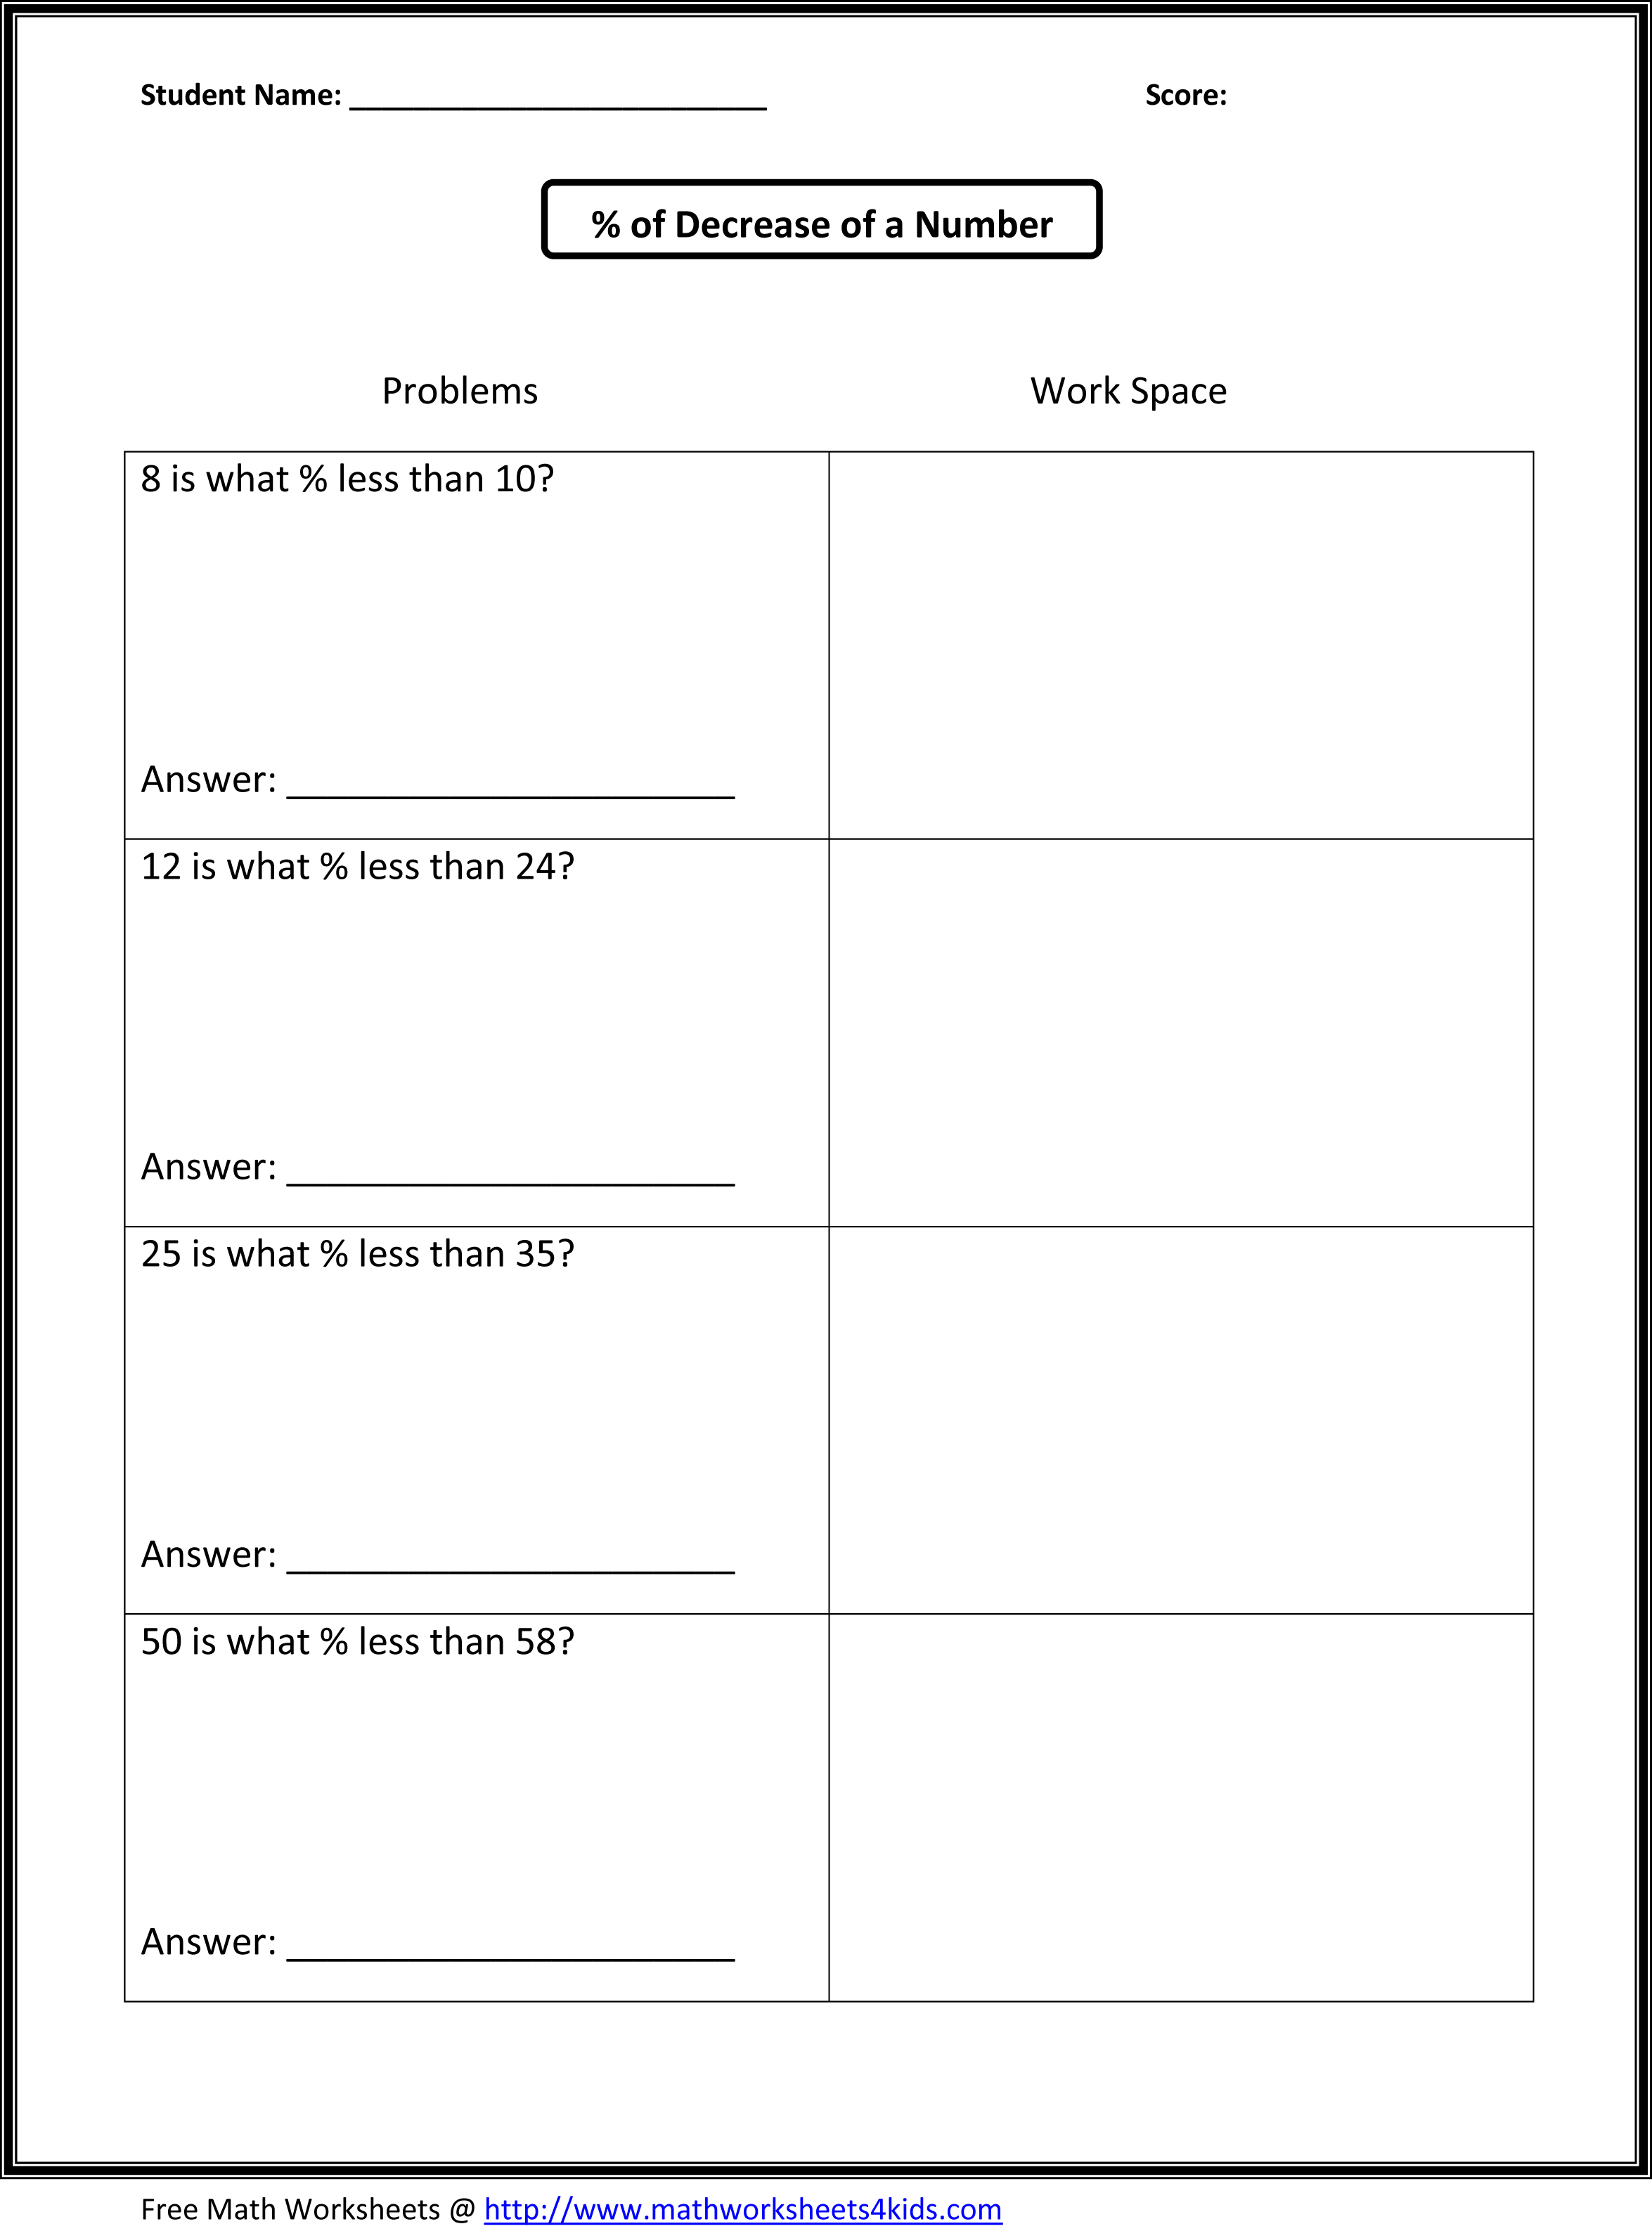 10-best-images-of-reading-worksheets-for-7th-grade-word-search-7th